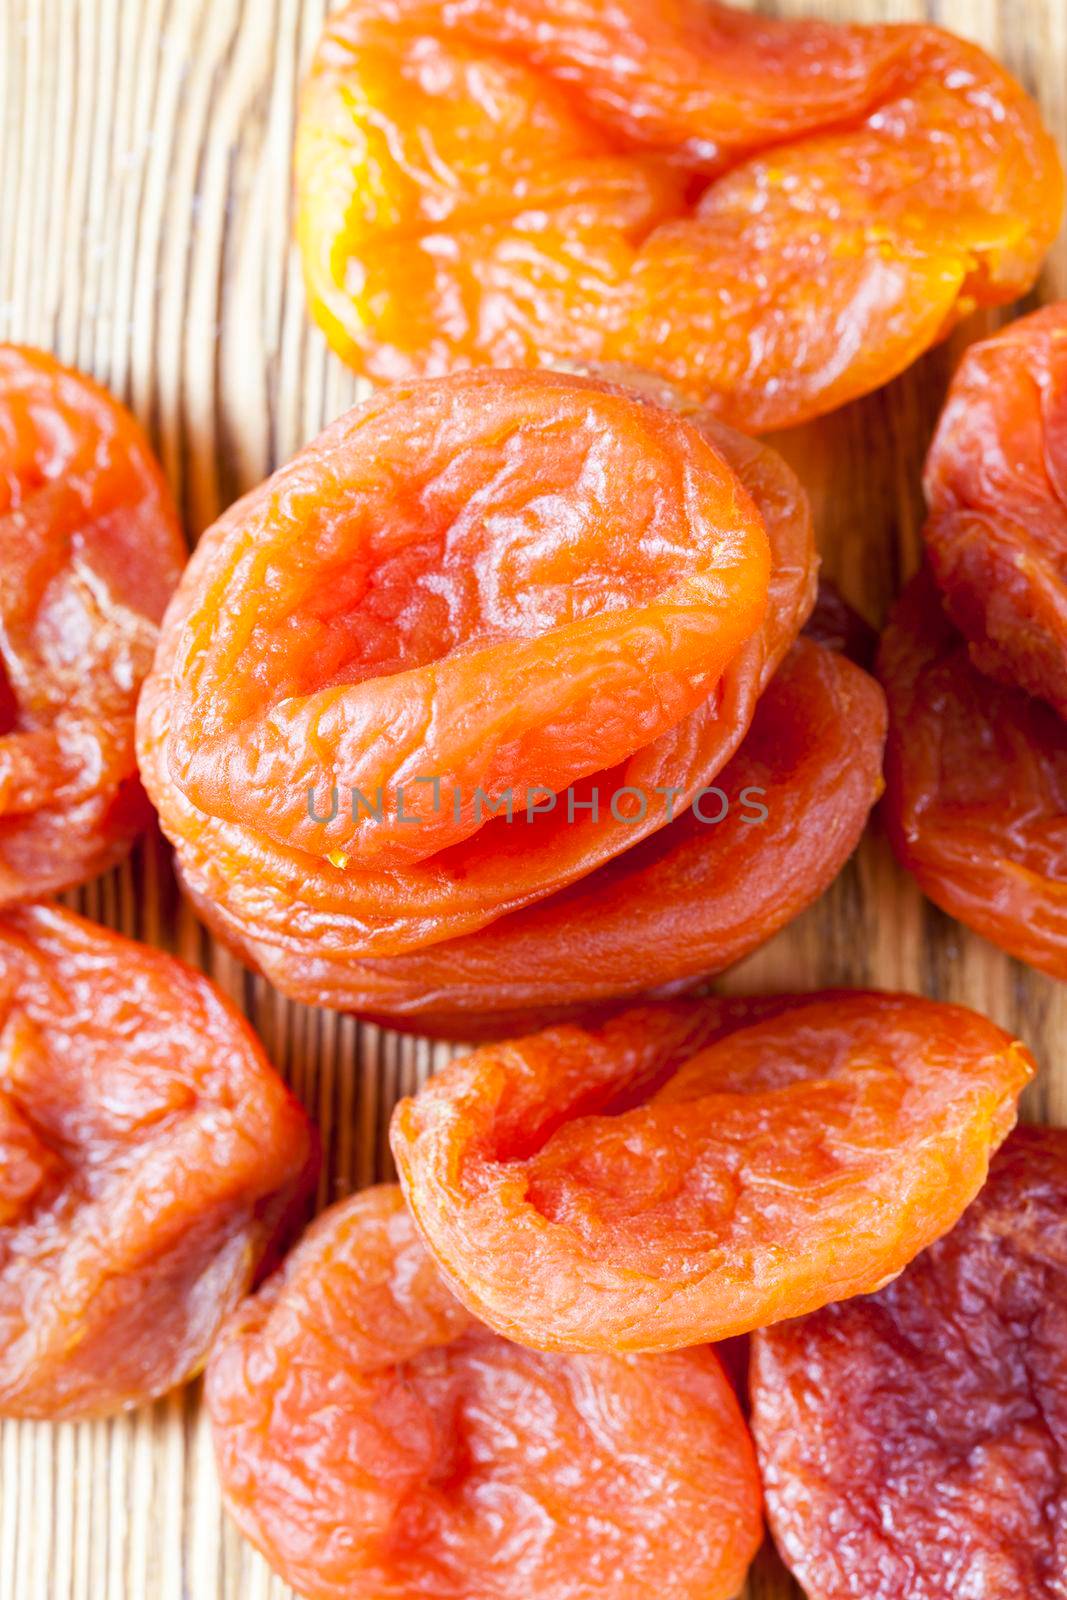 orange and yellow dried apricots on a wooden table, close-up